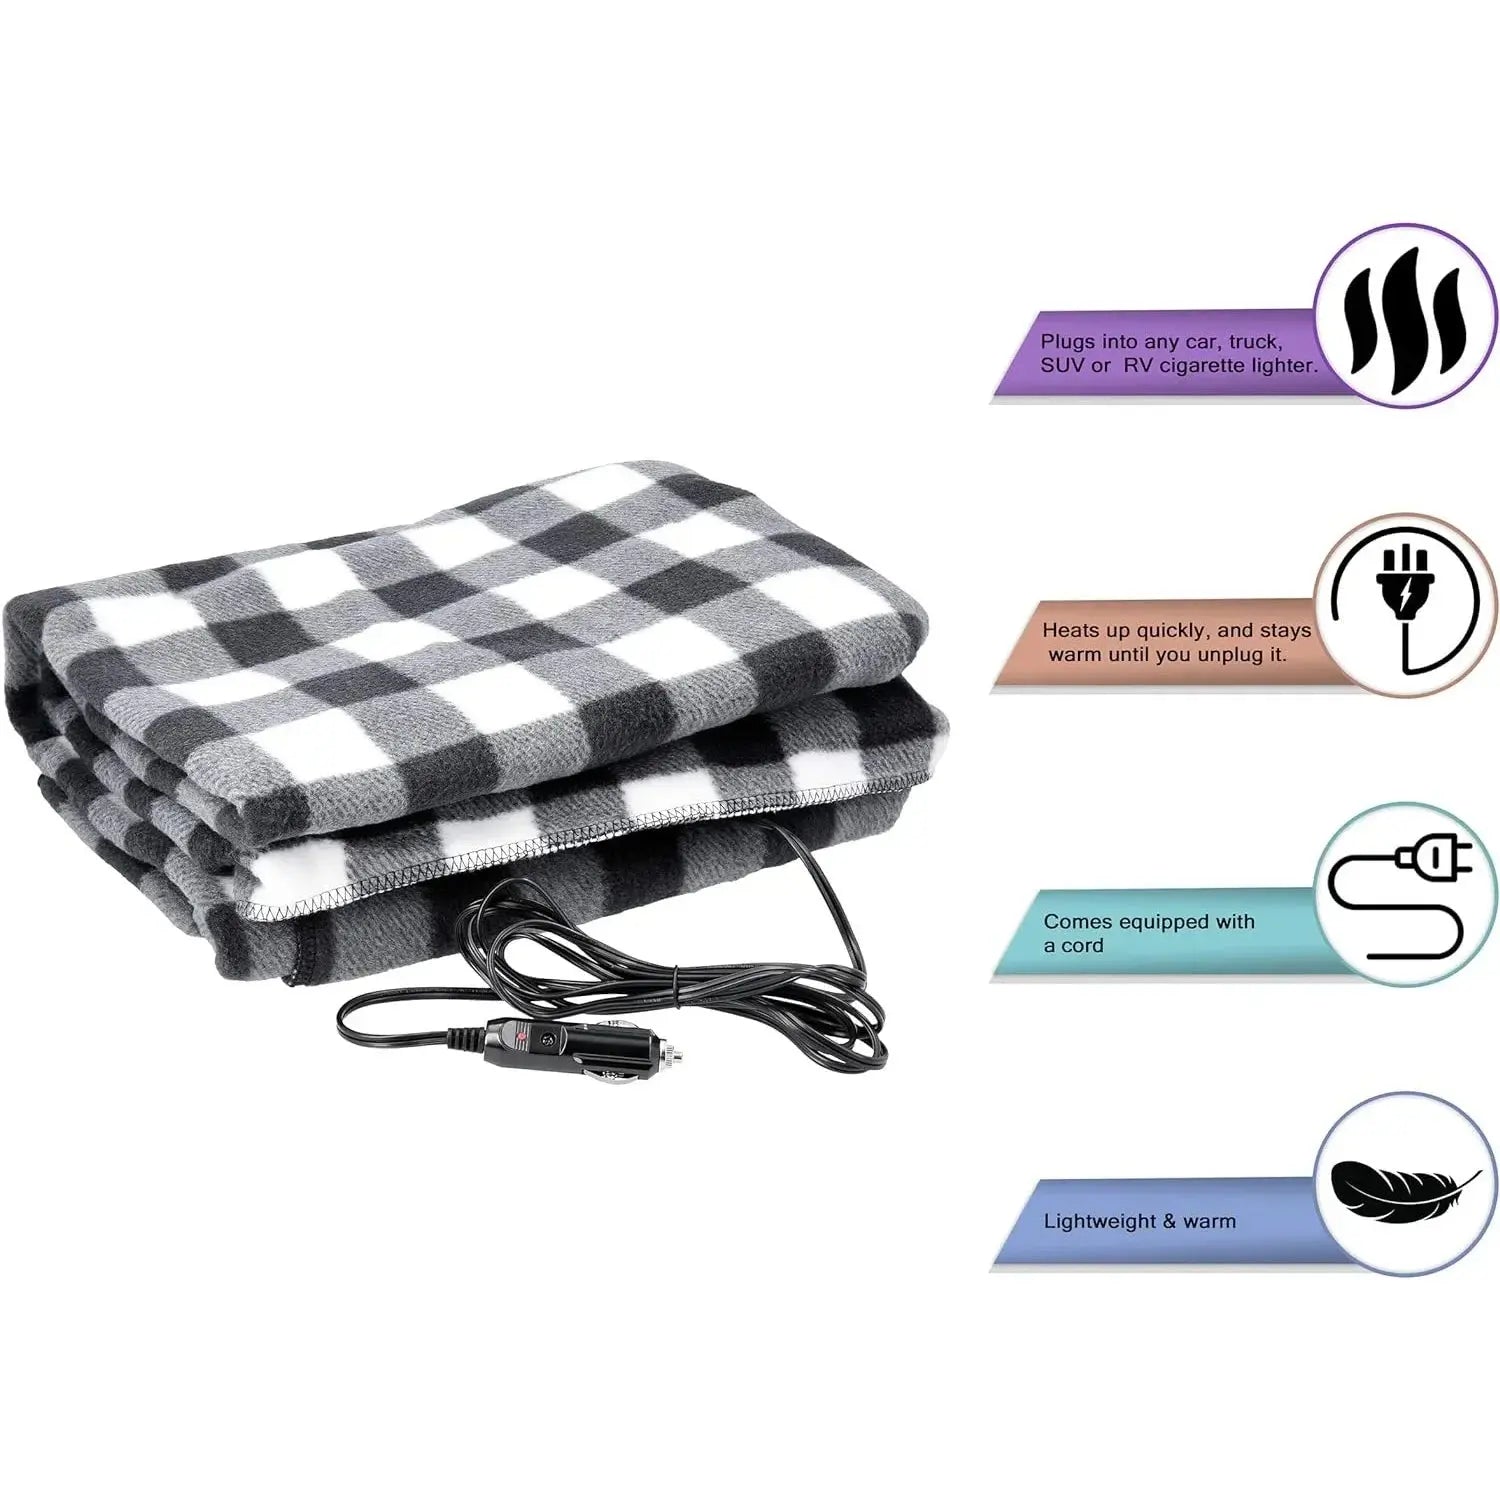 Premium Cozy Car Heating Blanket 12V Heated Fleece Travel Throw with Safety Timer Constant Temperature Heating Blanket BrothersCarCare